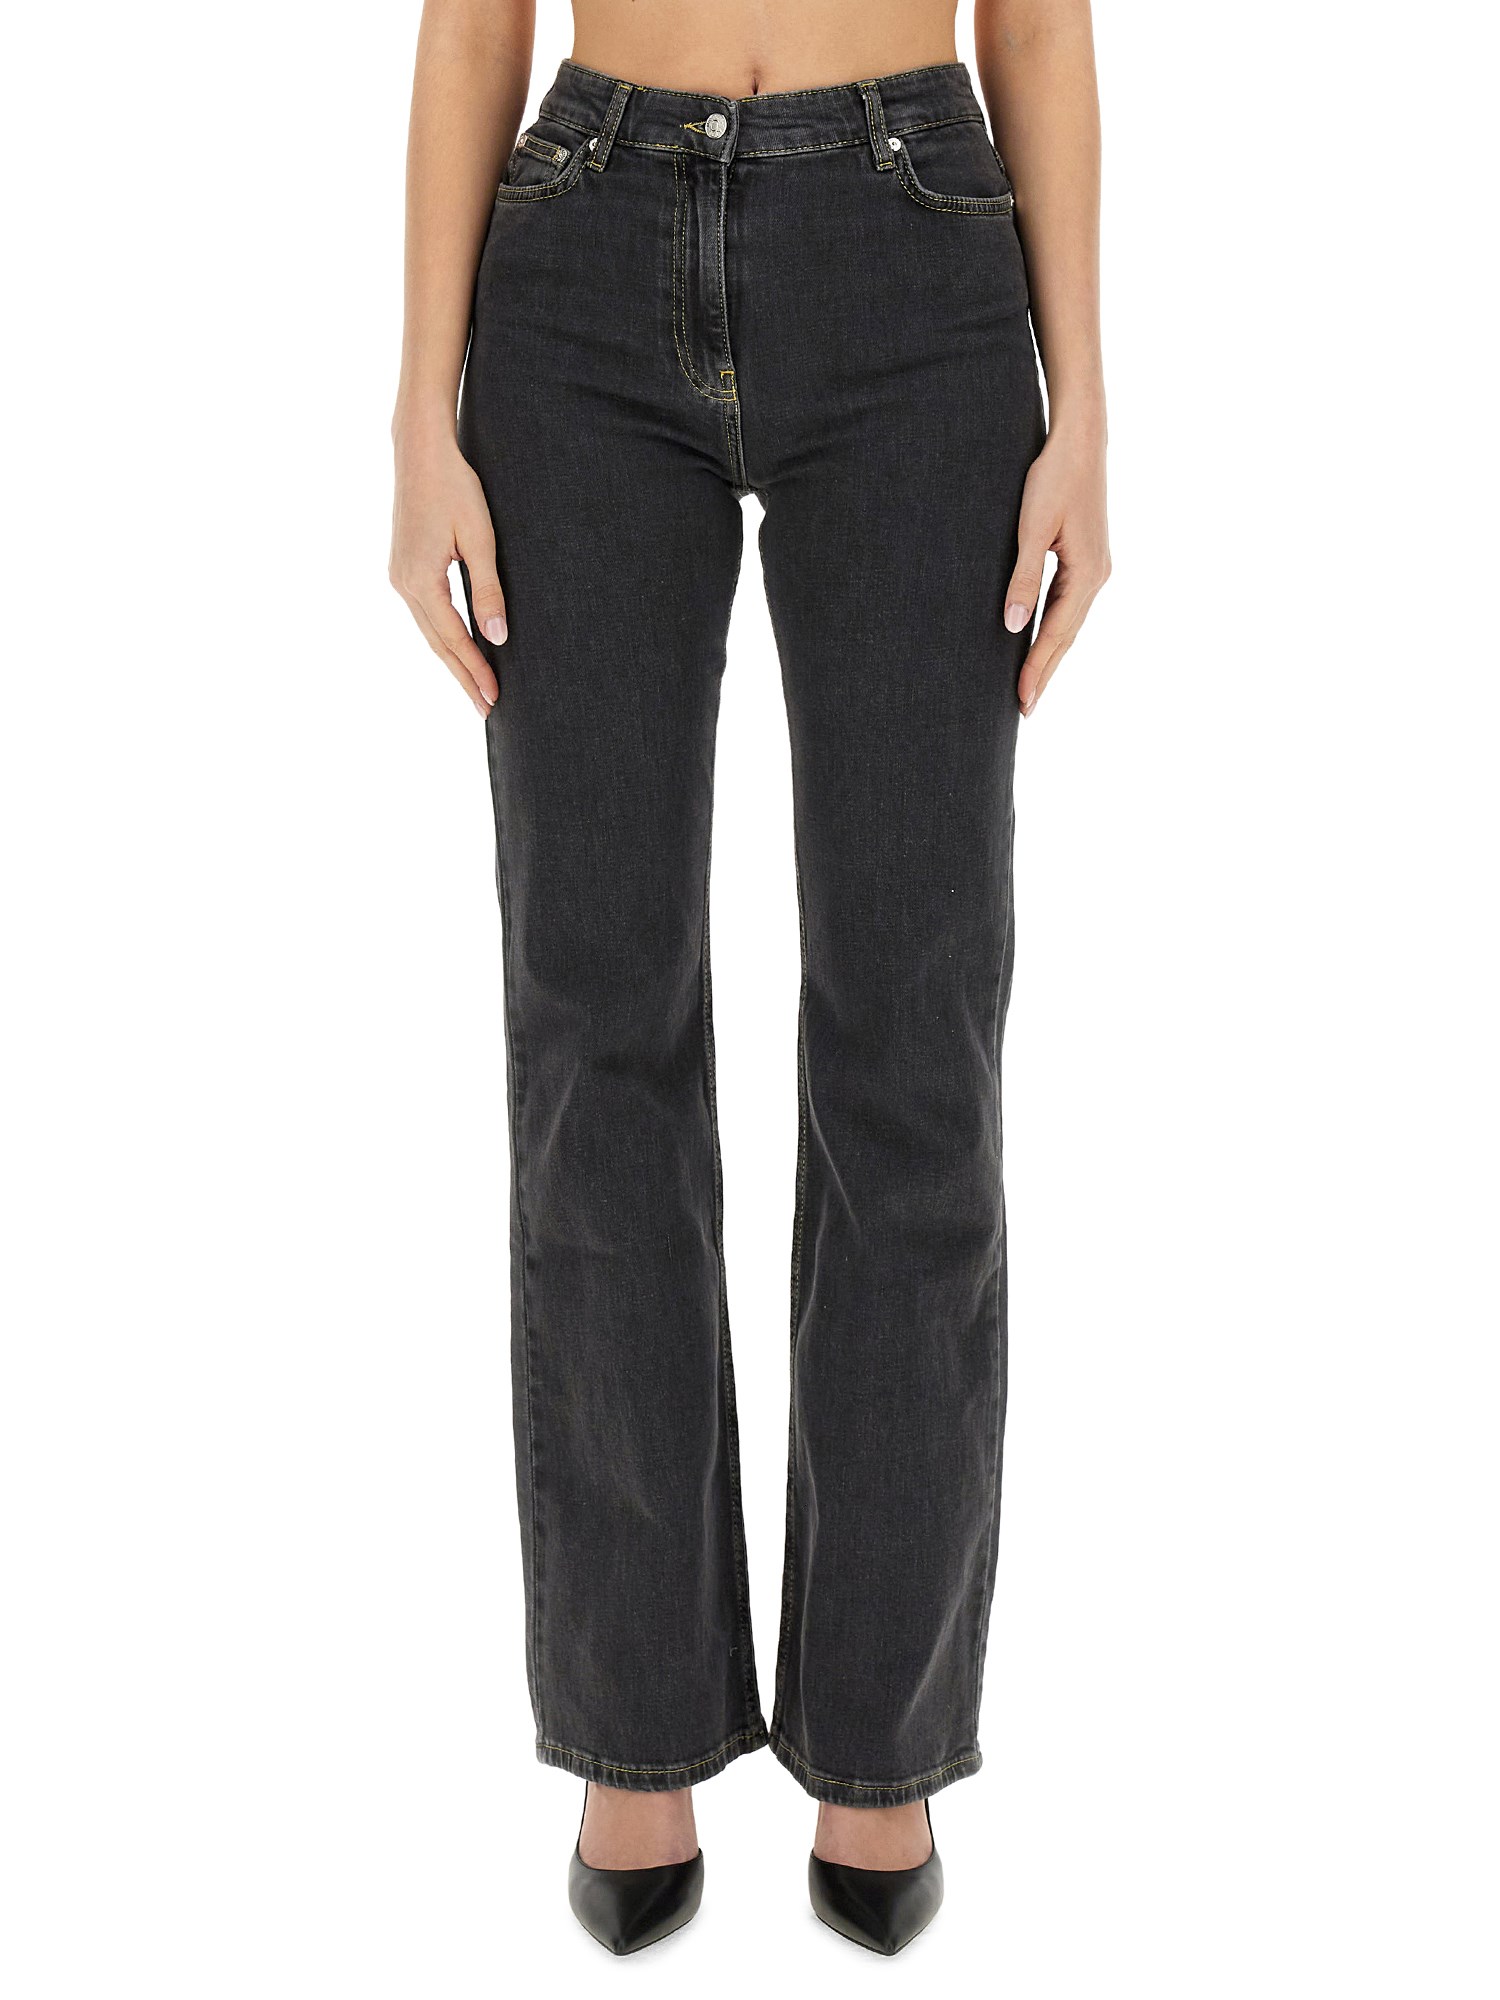 moschino jeans jeans wide leg